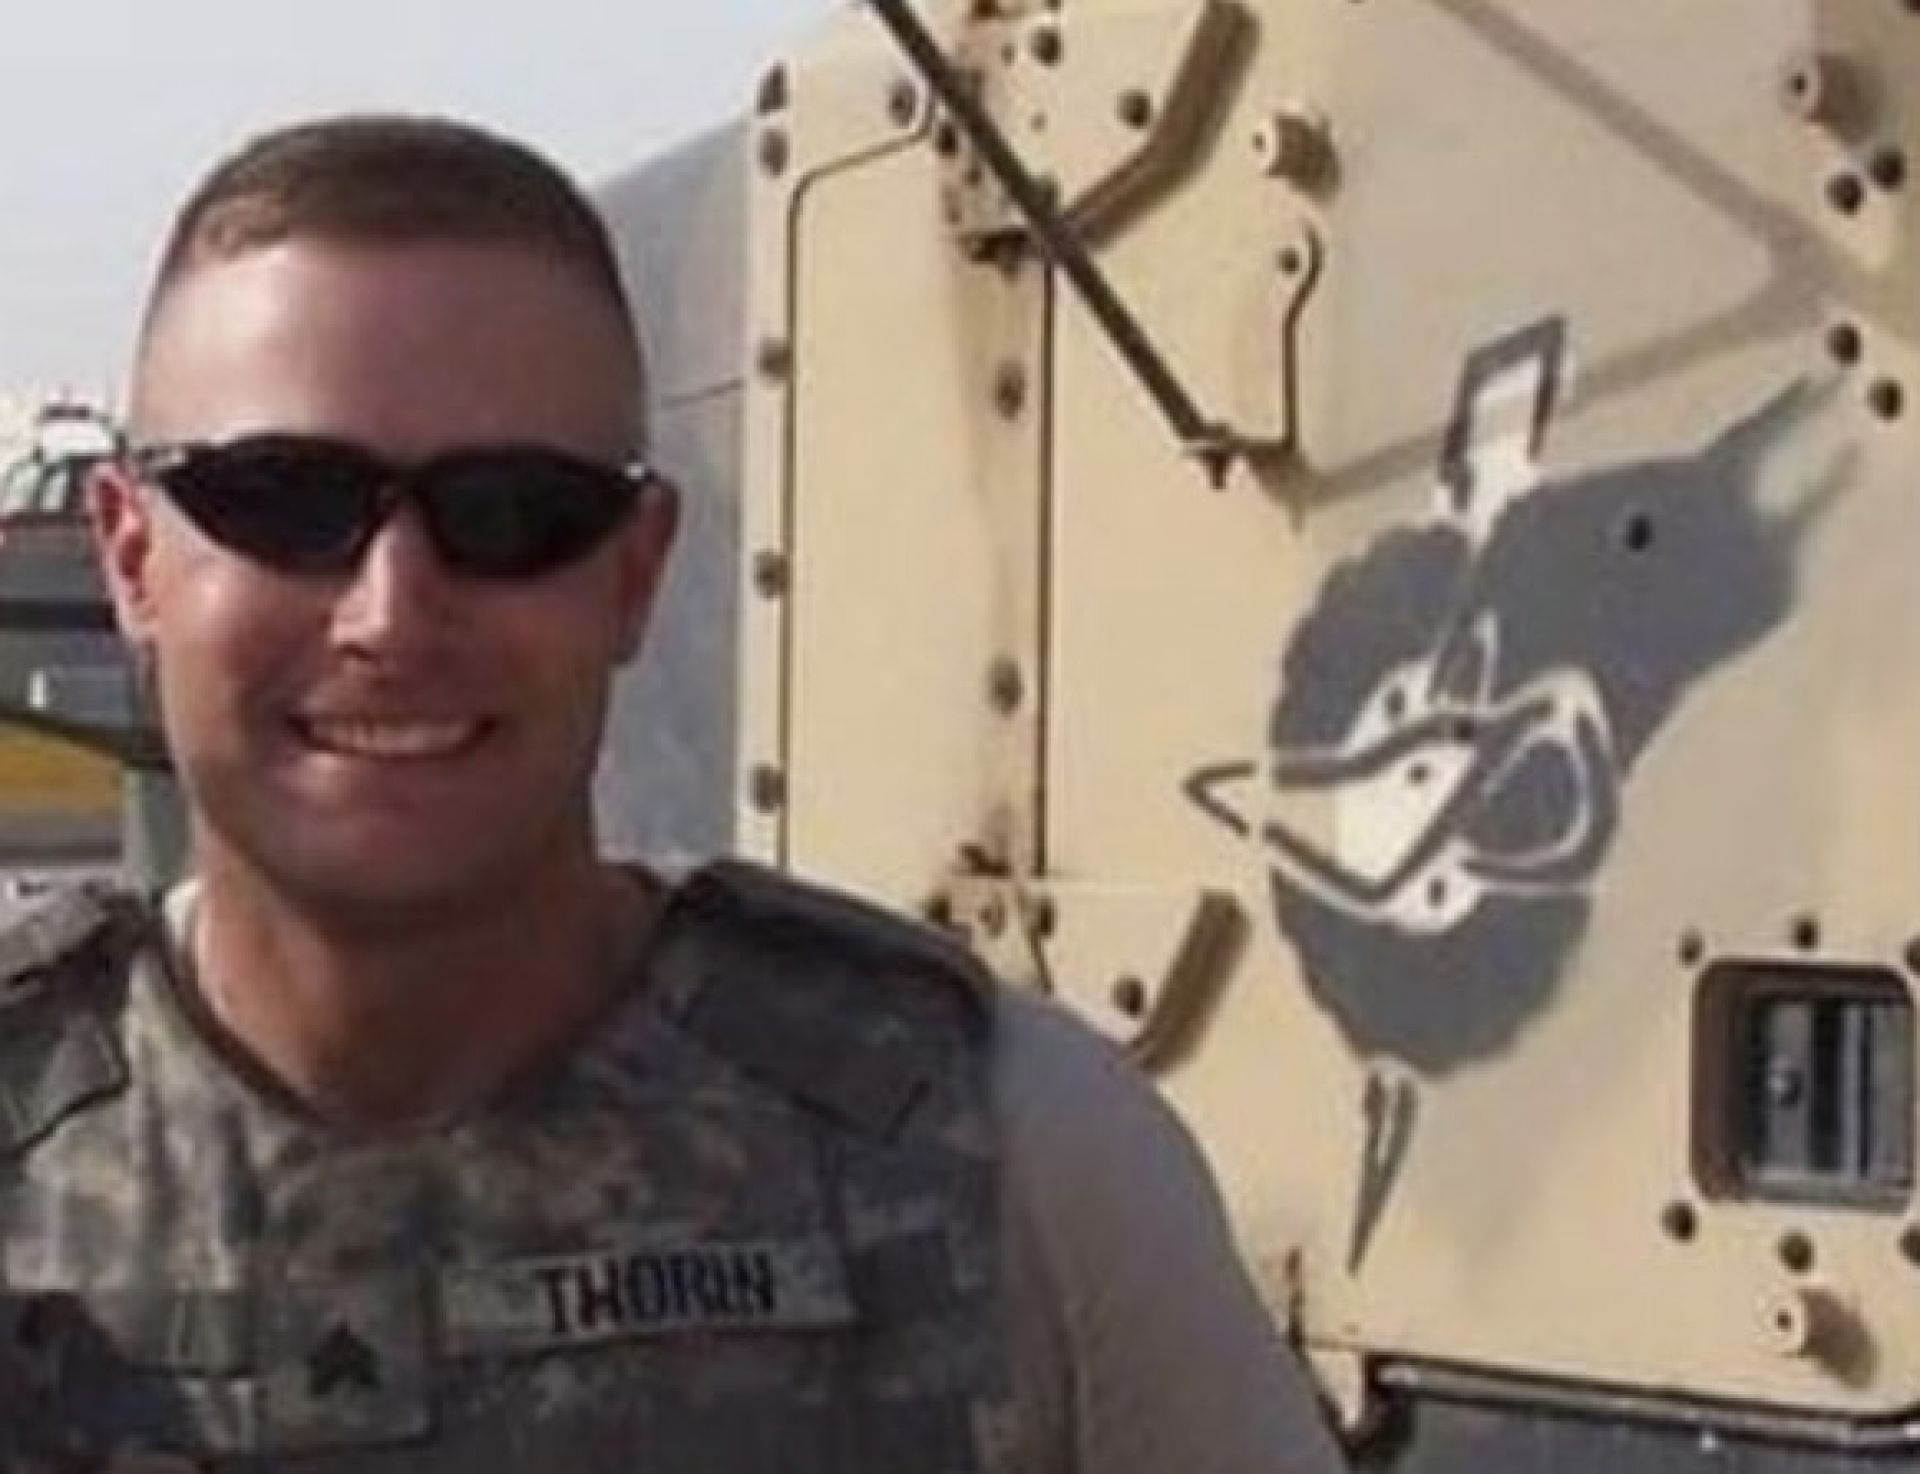 Photo: Sergeant Michael Thorin, US Army/Alabama National Guard during one of his deployments in Iraq